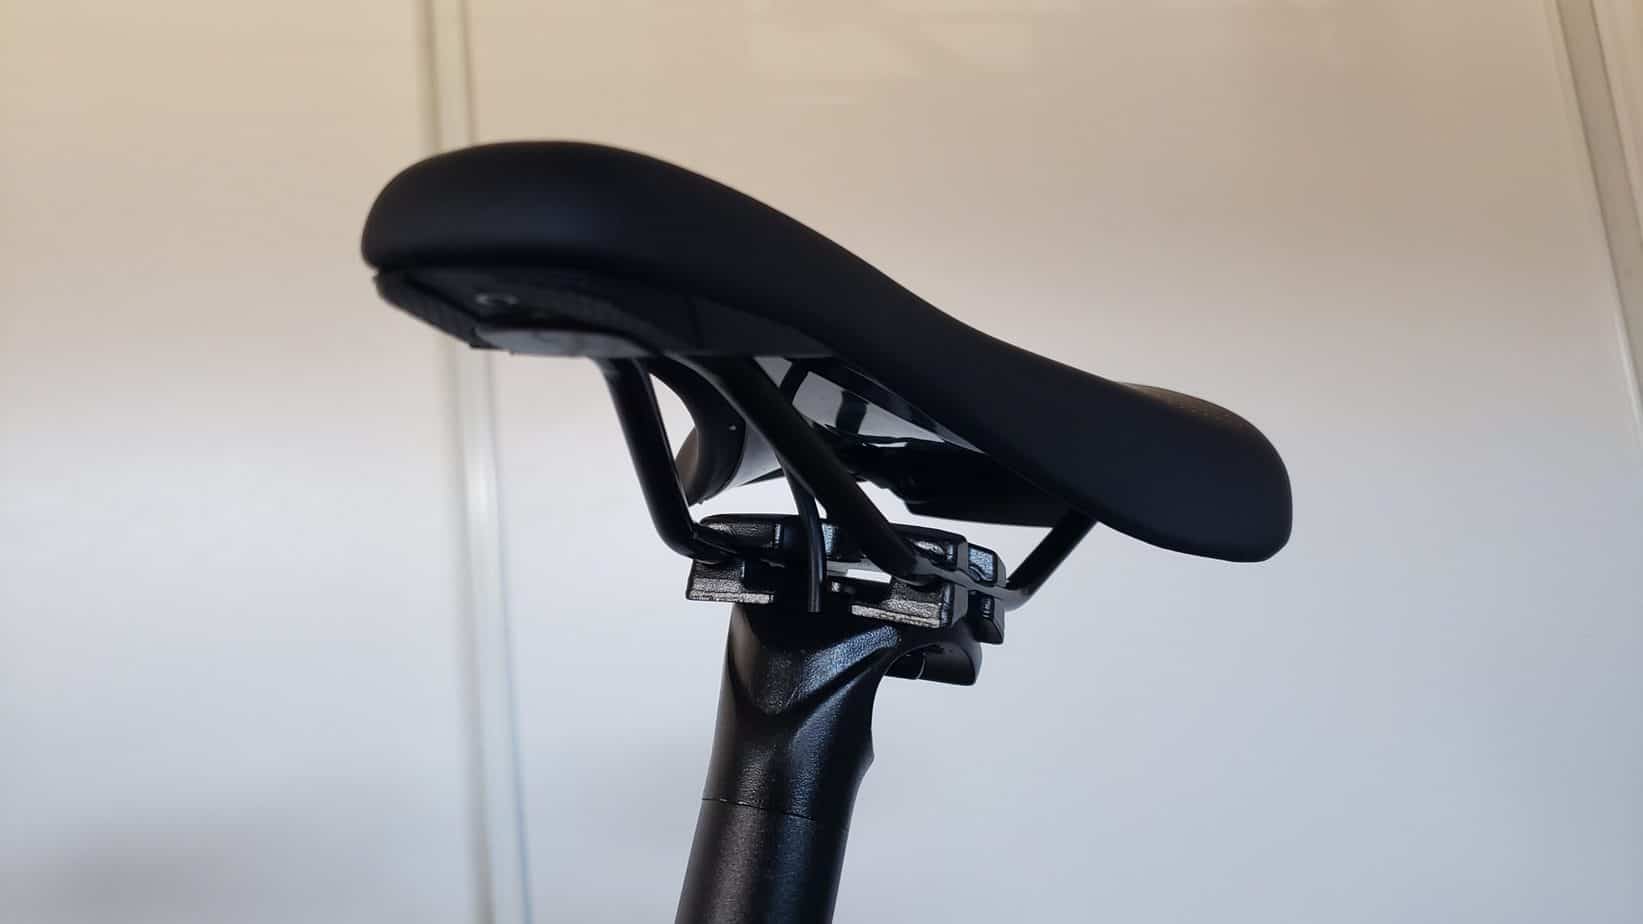 Upgrading the seat and seat post on a Specialized Vado SL 4.0